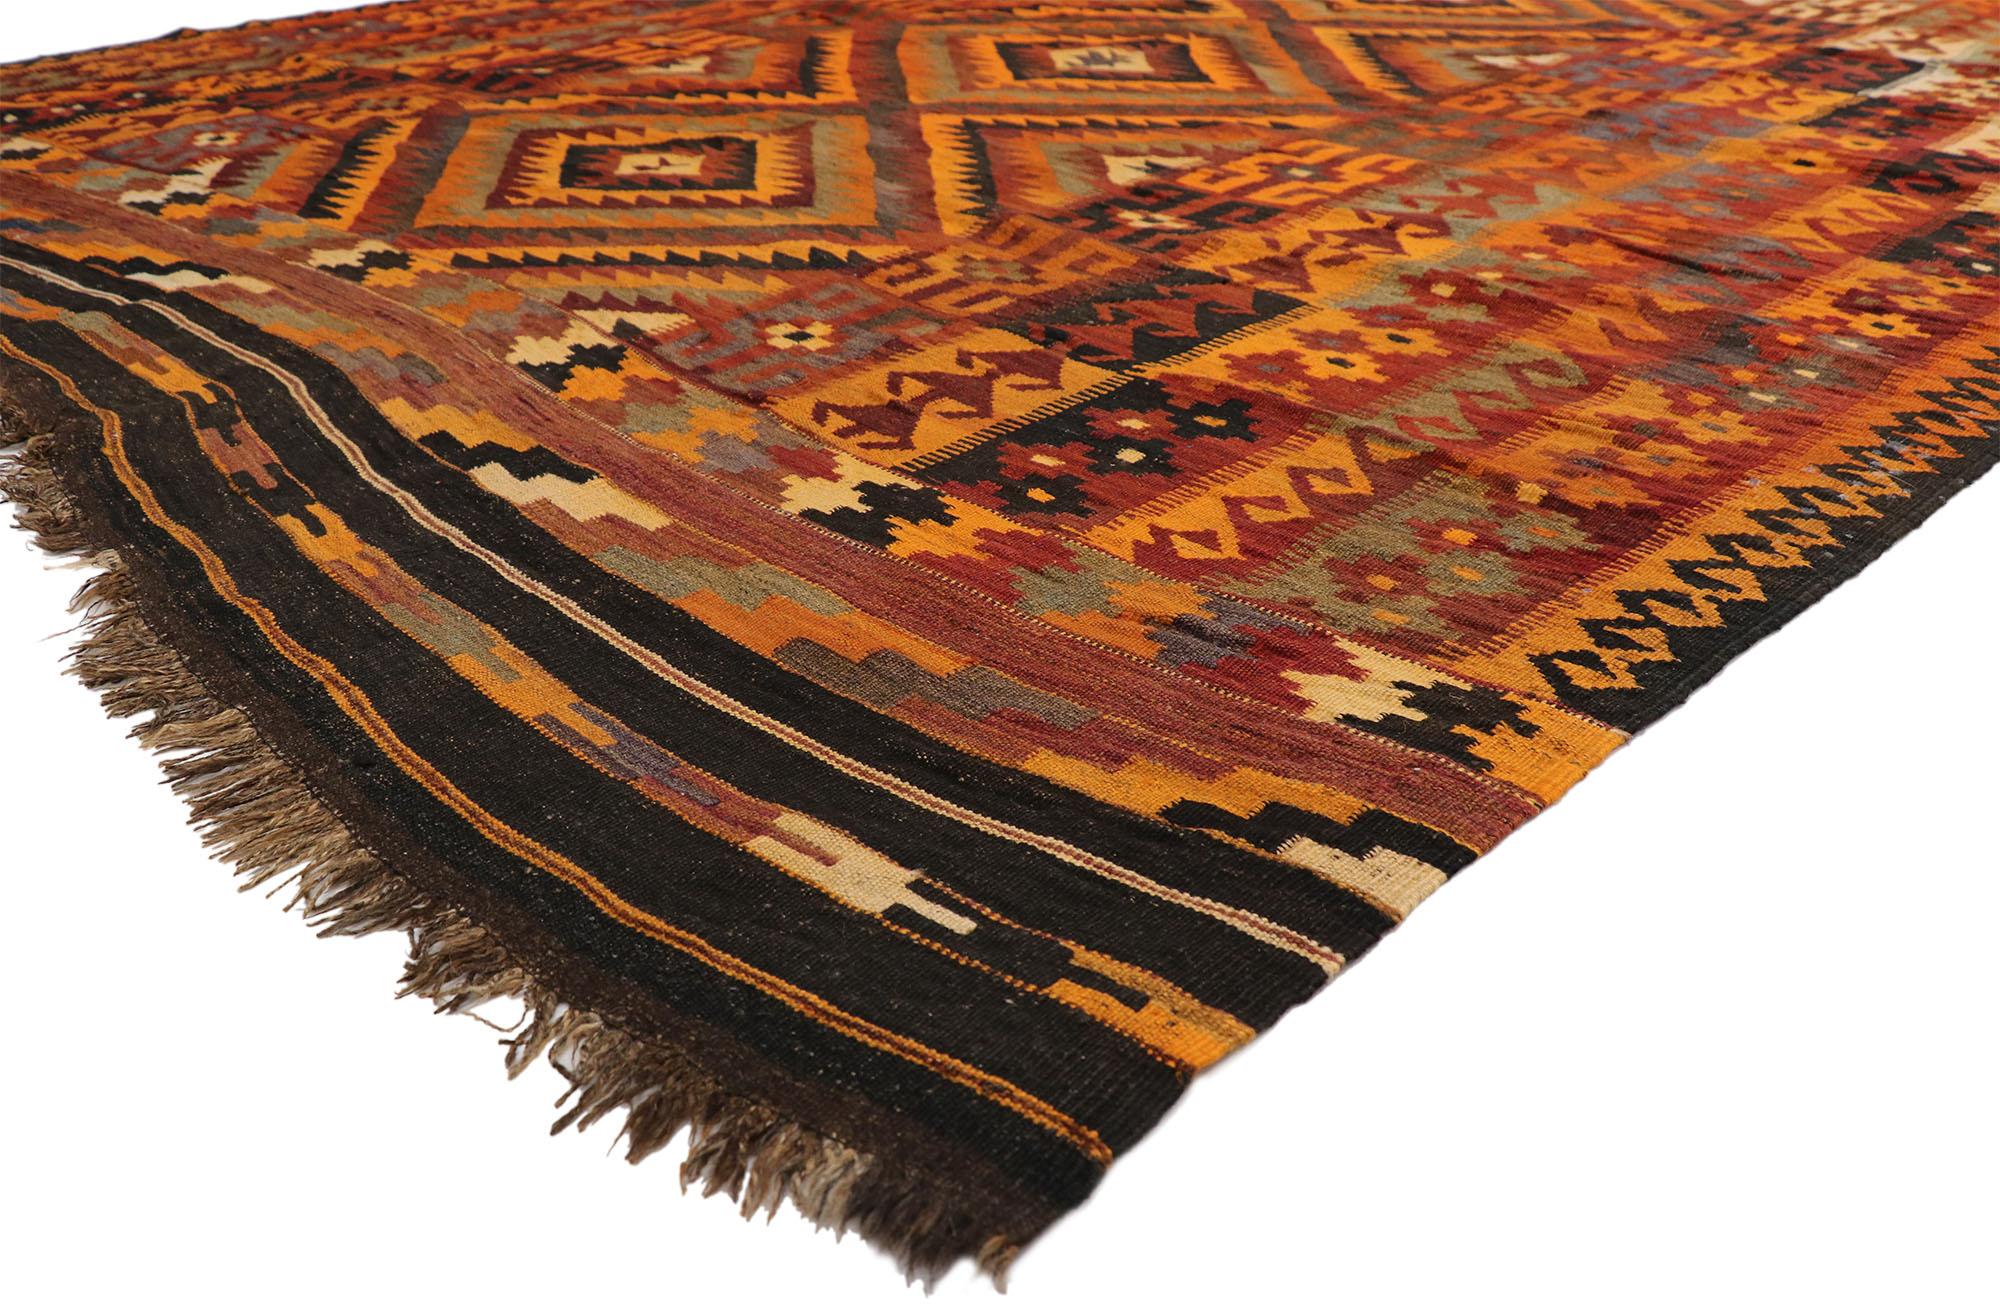 72767, vintage Afghan Ghalmouri Maimana Kilim rug with Nomadic Tribal style. Boasting a stunning tribal design and modern style with rustic sensibility, this hand-woven wool vintage Afghan Kilim rug is poised to impress. The abrashed field features